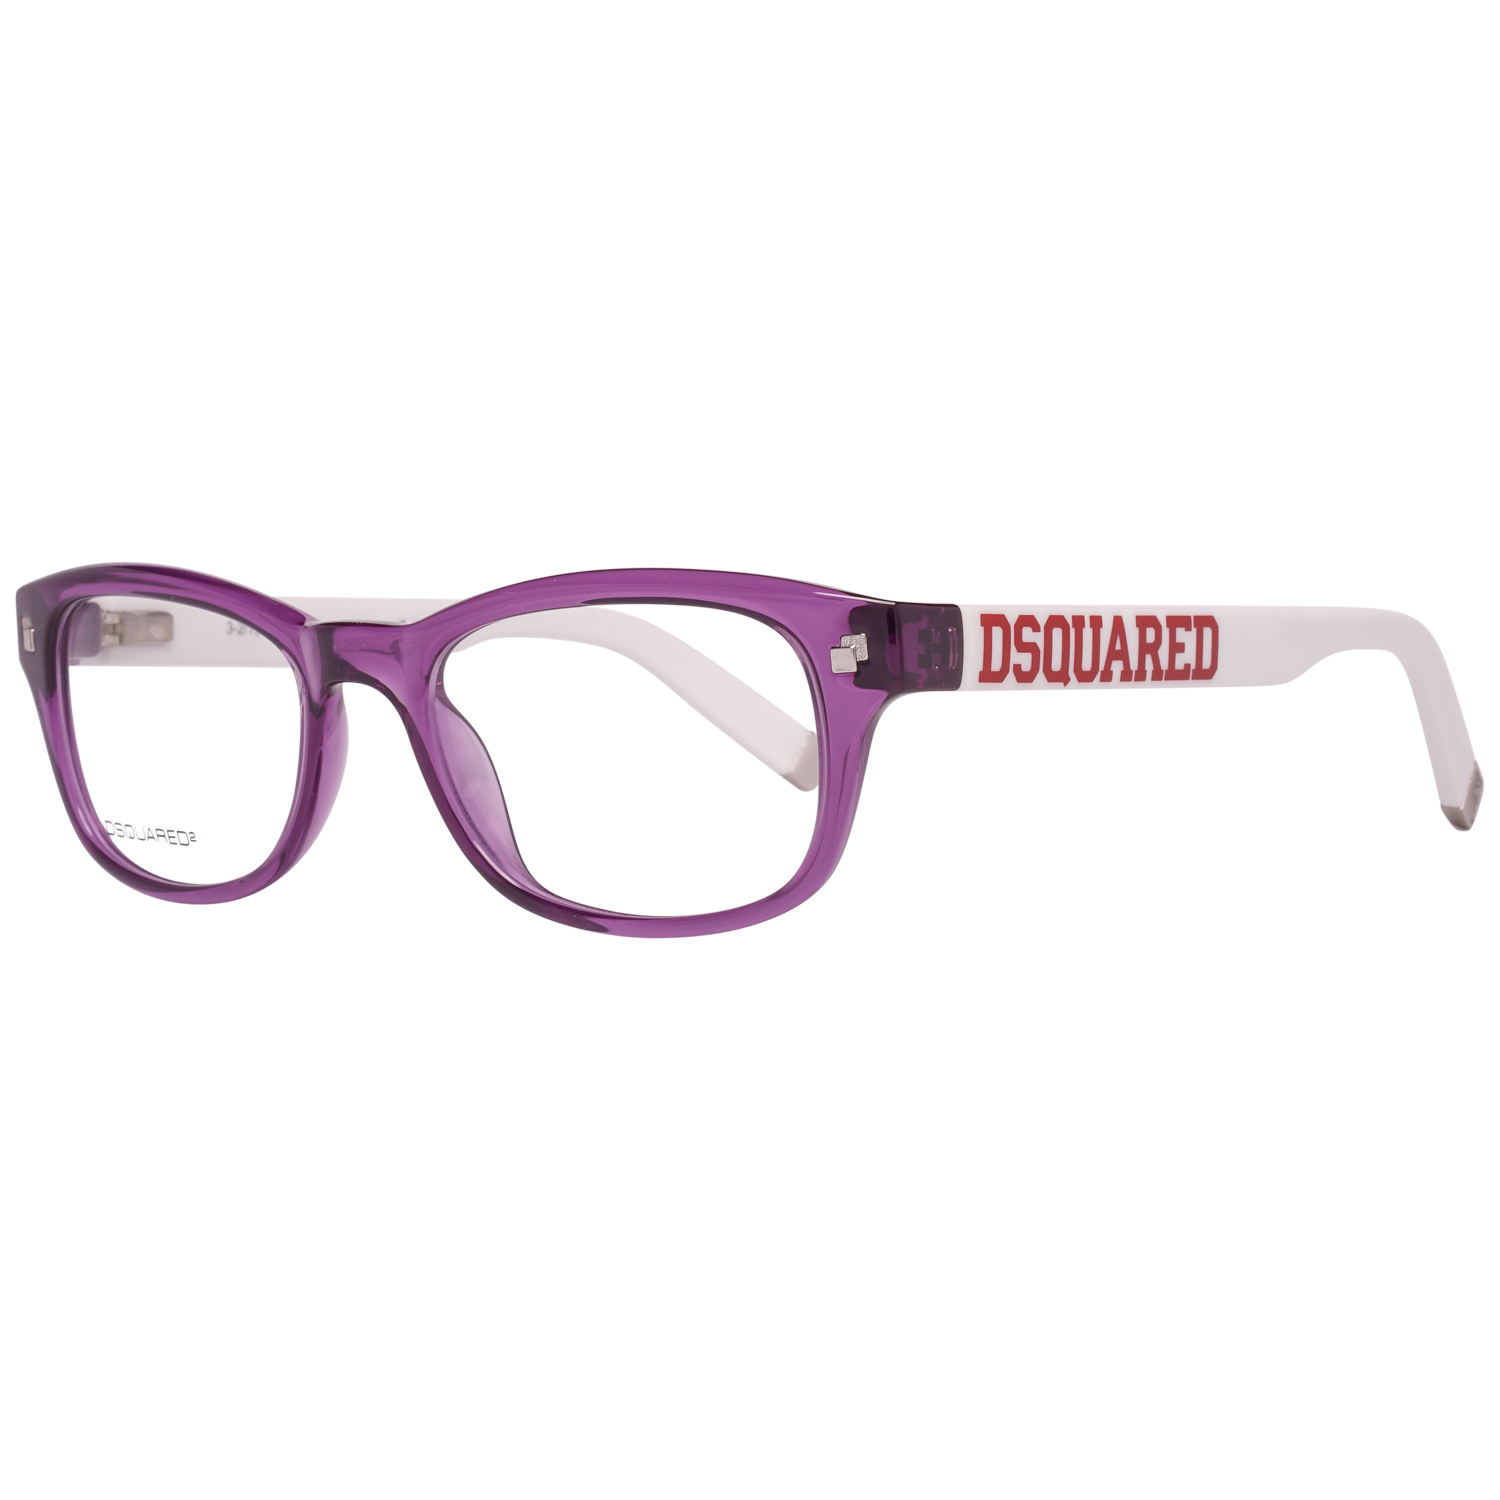 Dsquared2 Optical Frame DQ5006 081 51